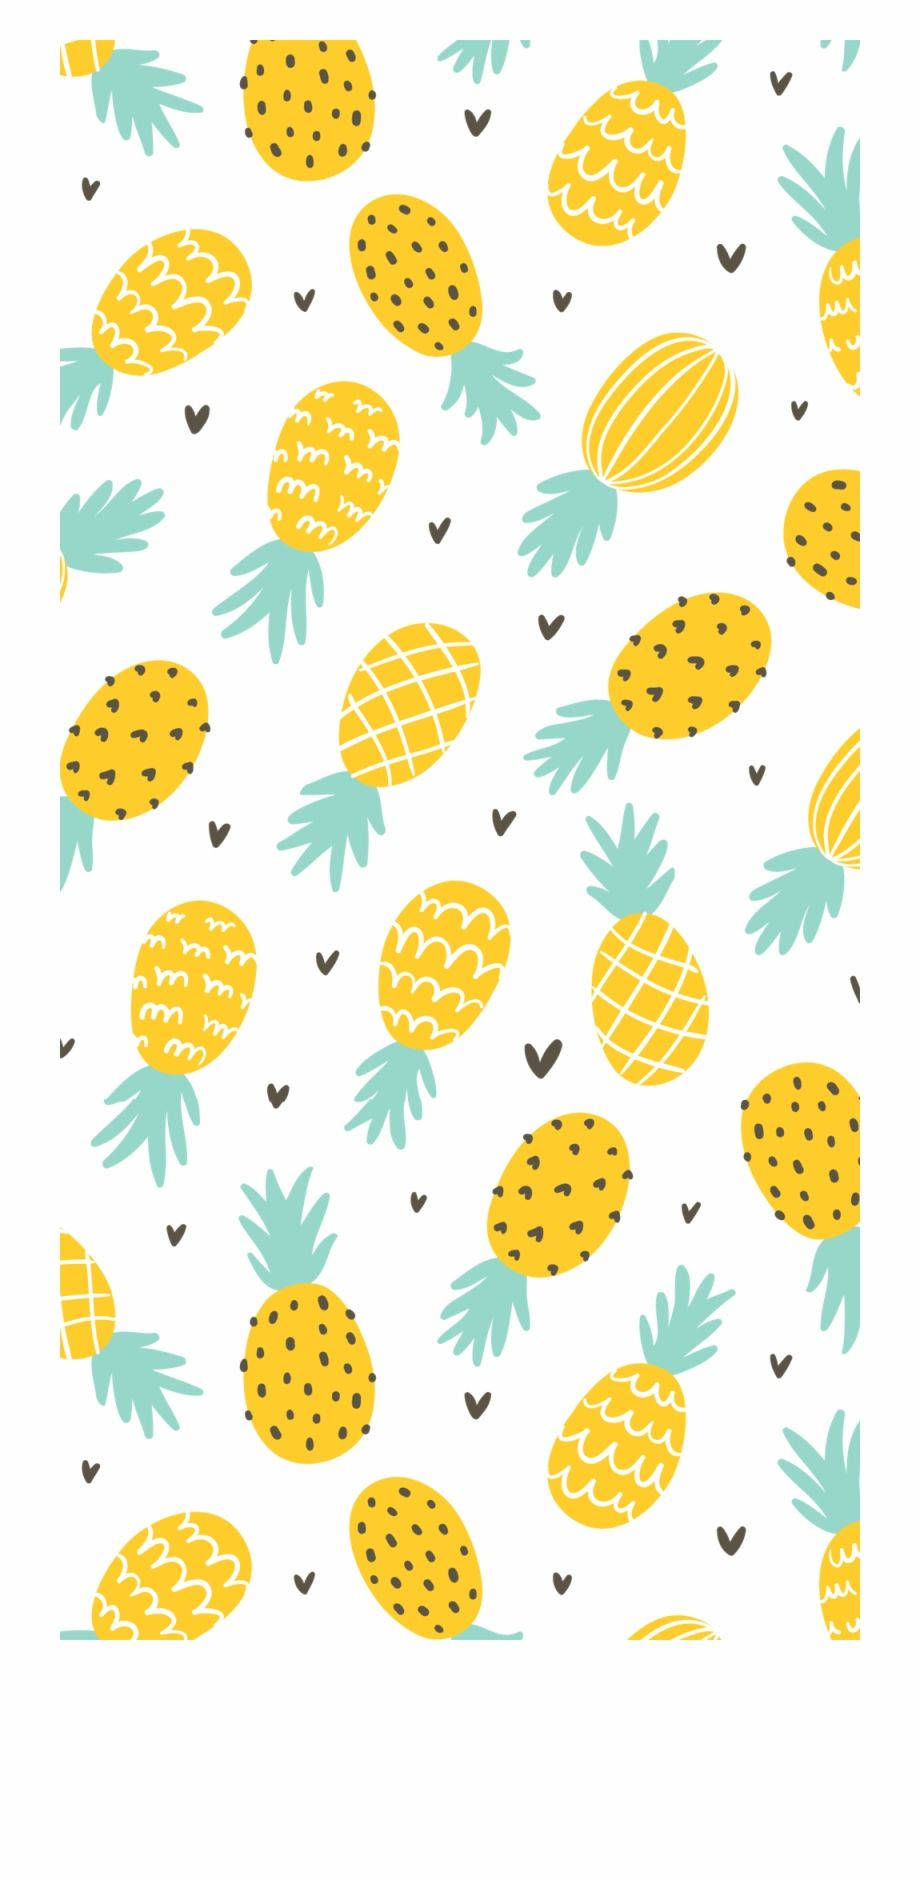 Stay Stylish and Fun with the Pineapple Iphone Wallpaper